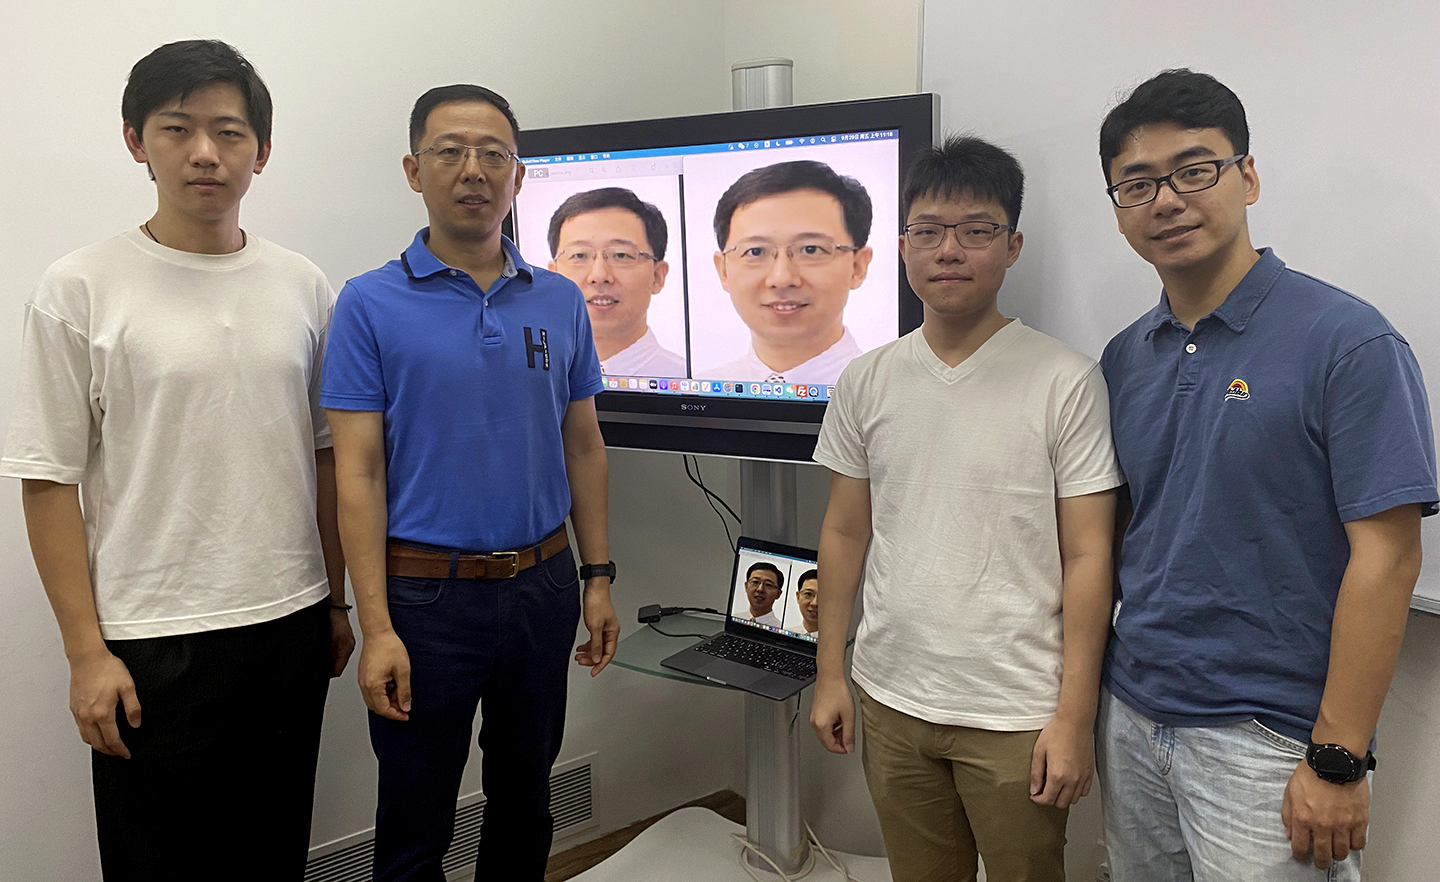 Photo of researchers standing beside a digital display screen with their project featured.